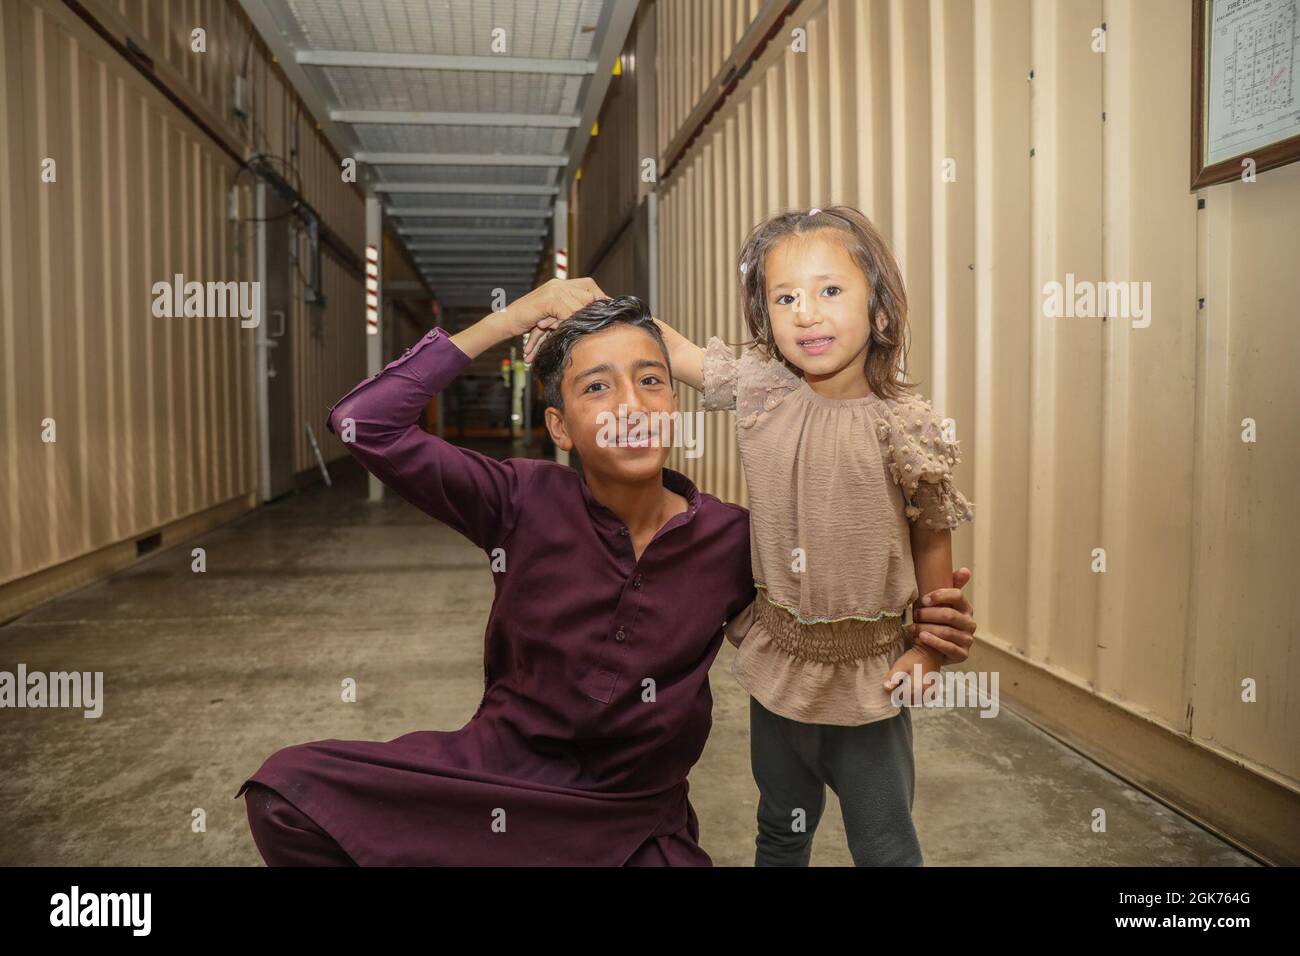 An Afghan boy smiles with his sister at a lodging and housing facility for evacuees in the CENTCOM AOR, Aug. 21, 2021. Qualified evacuees will receive support, such as temporary lodging, food, medical screening and treatment. Stock Photo